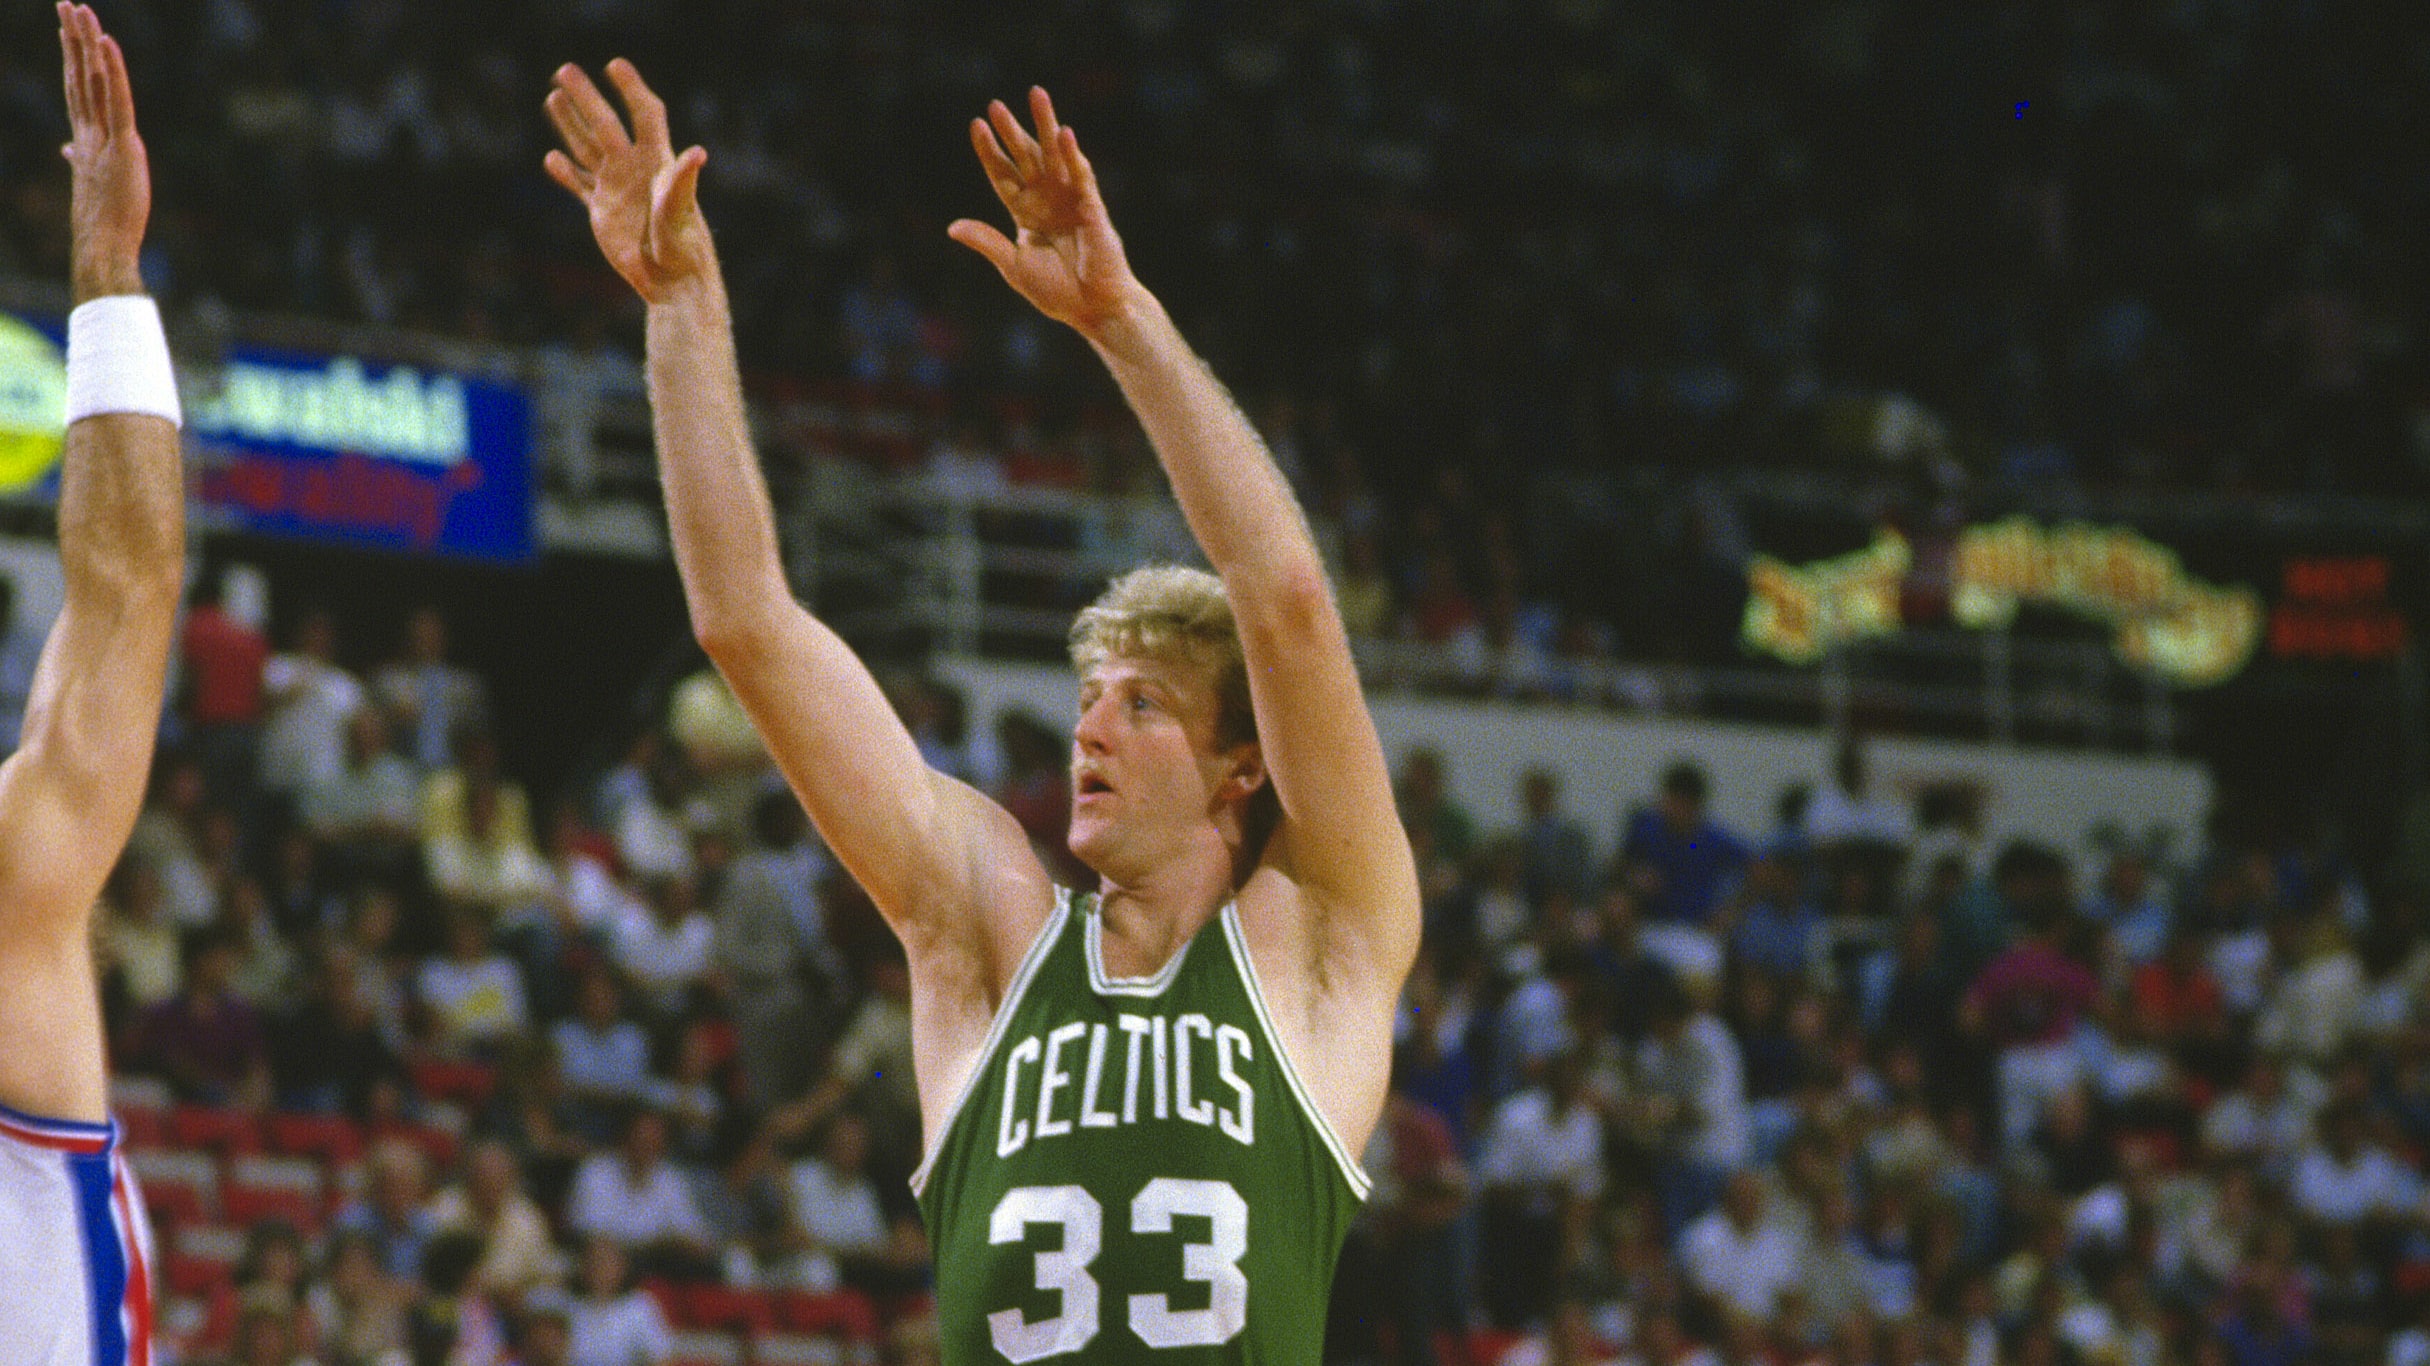 The greatest players in Boston Celtics history